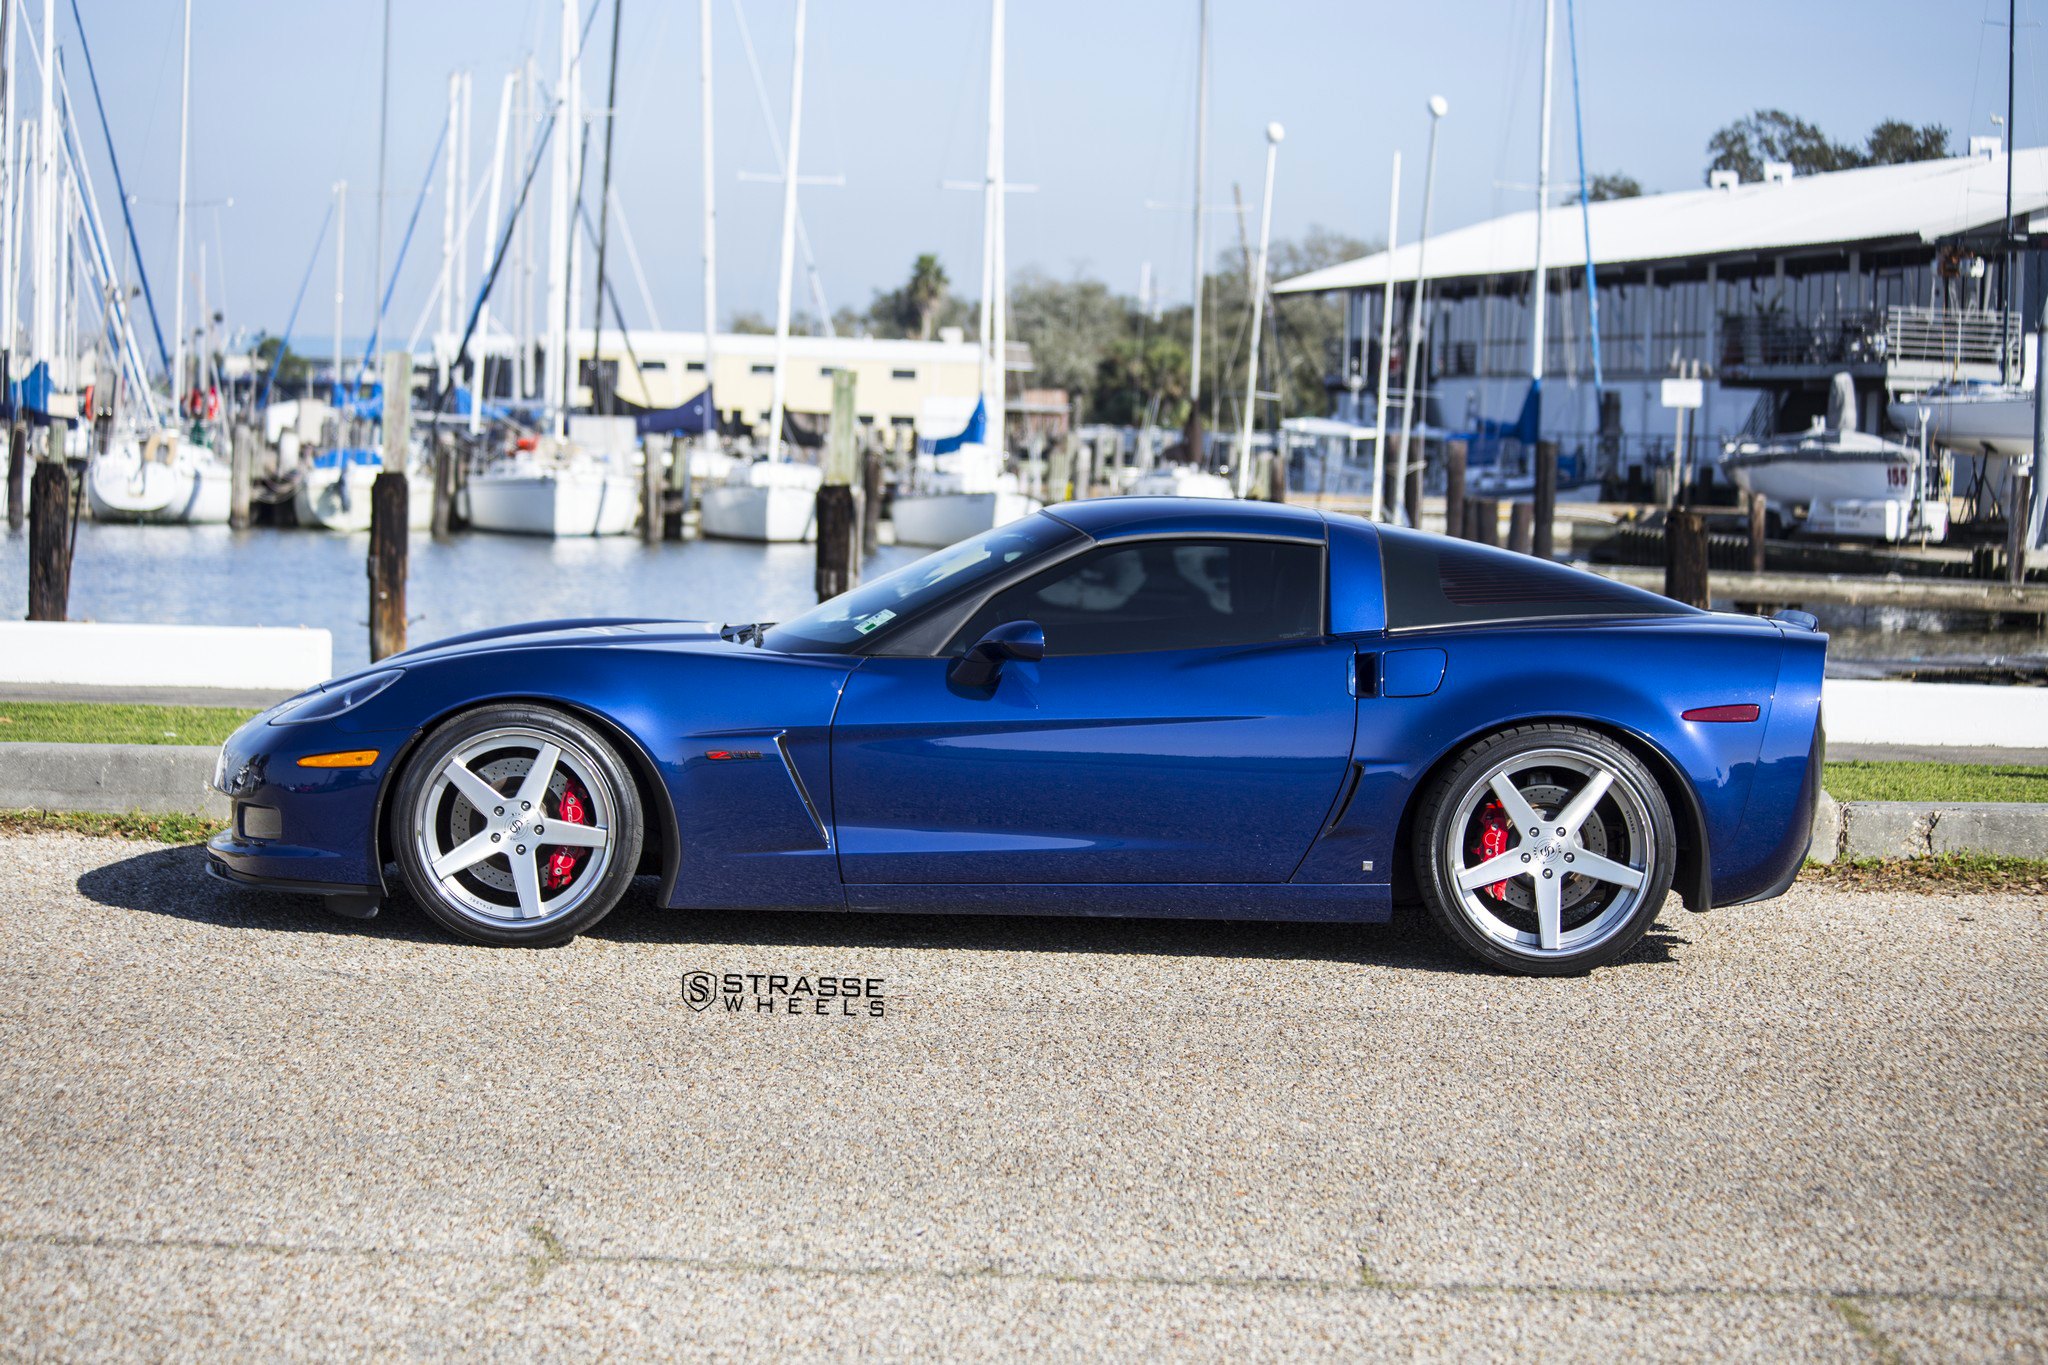 Blue Chevy Corvette with Chrome Strasse Wheels - Photo by Strasse Forged